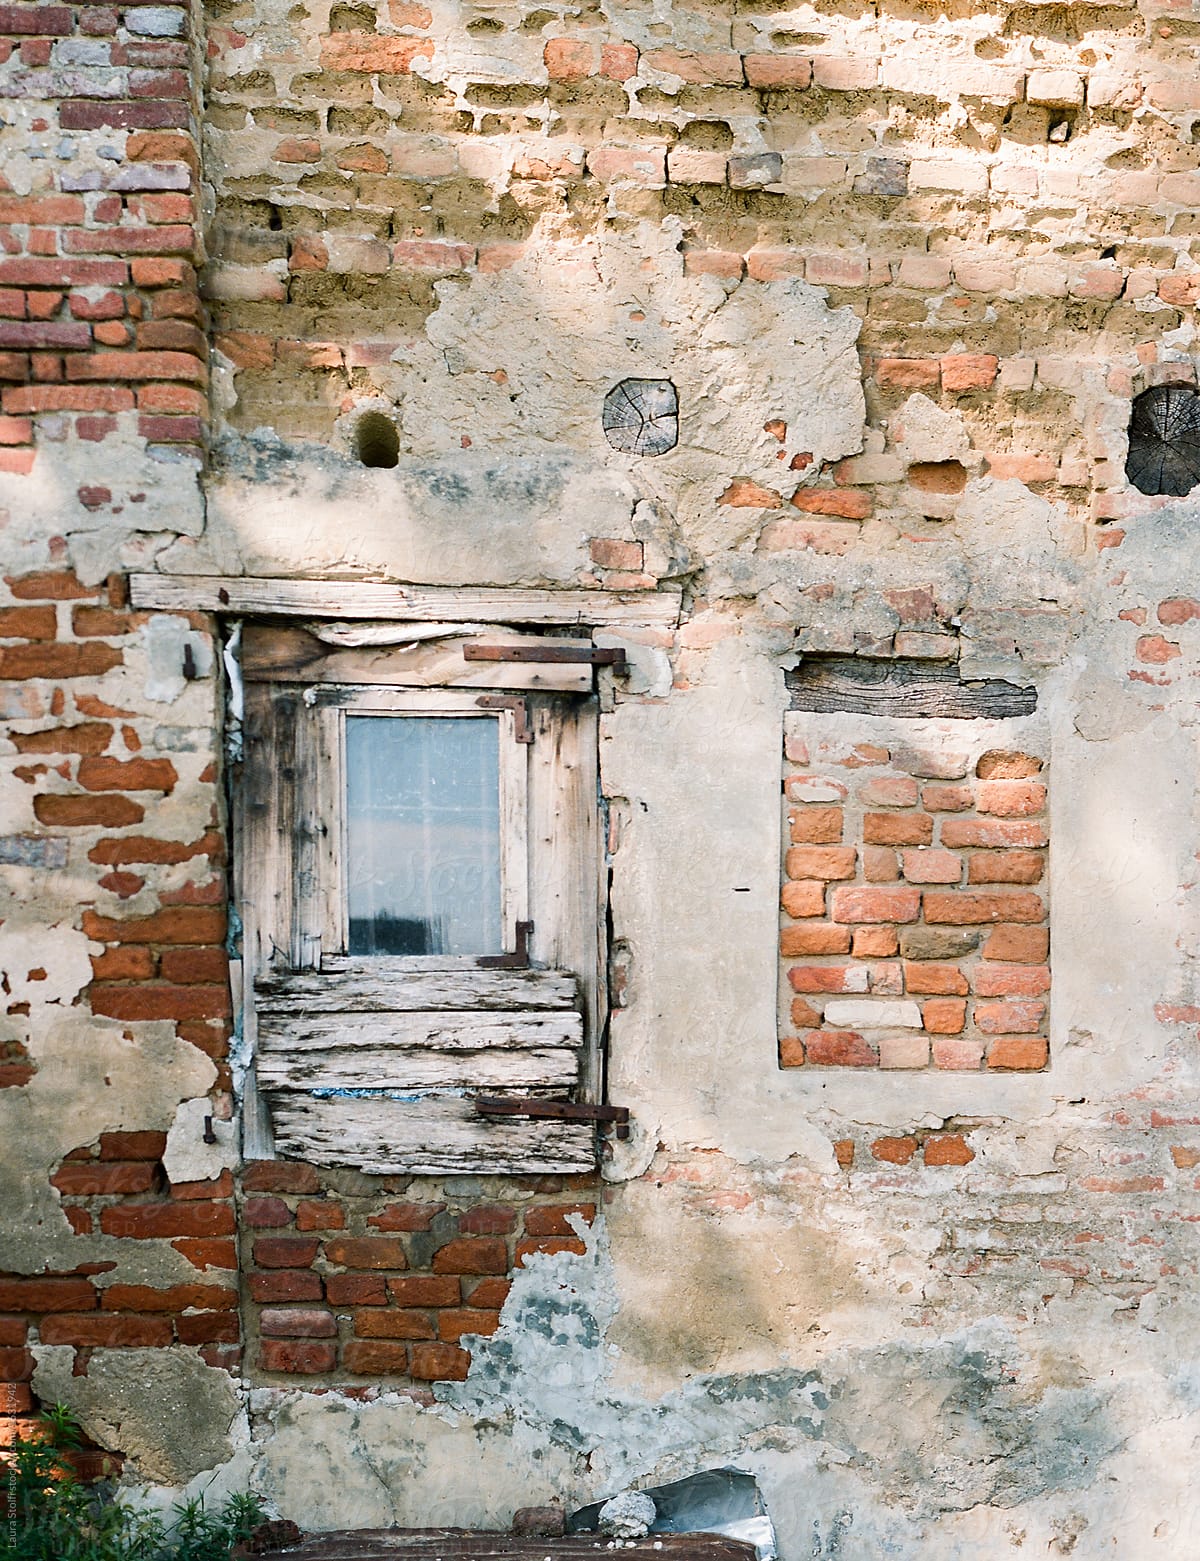 Damaged antique wooden window in ruined brick building in Italy